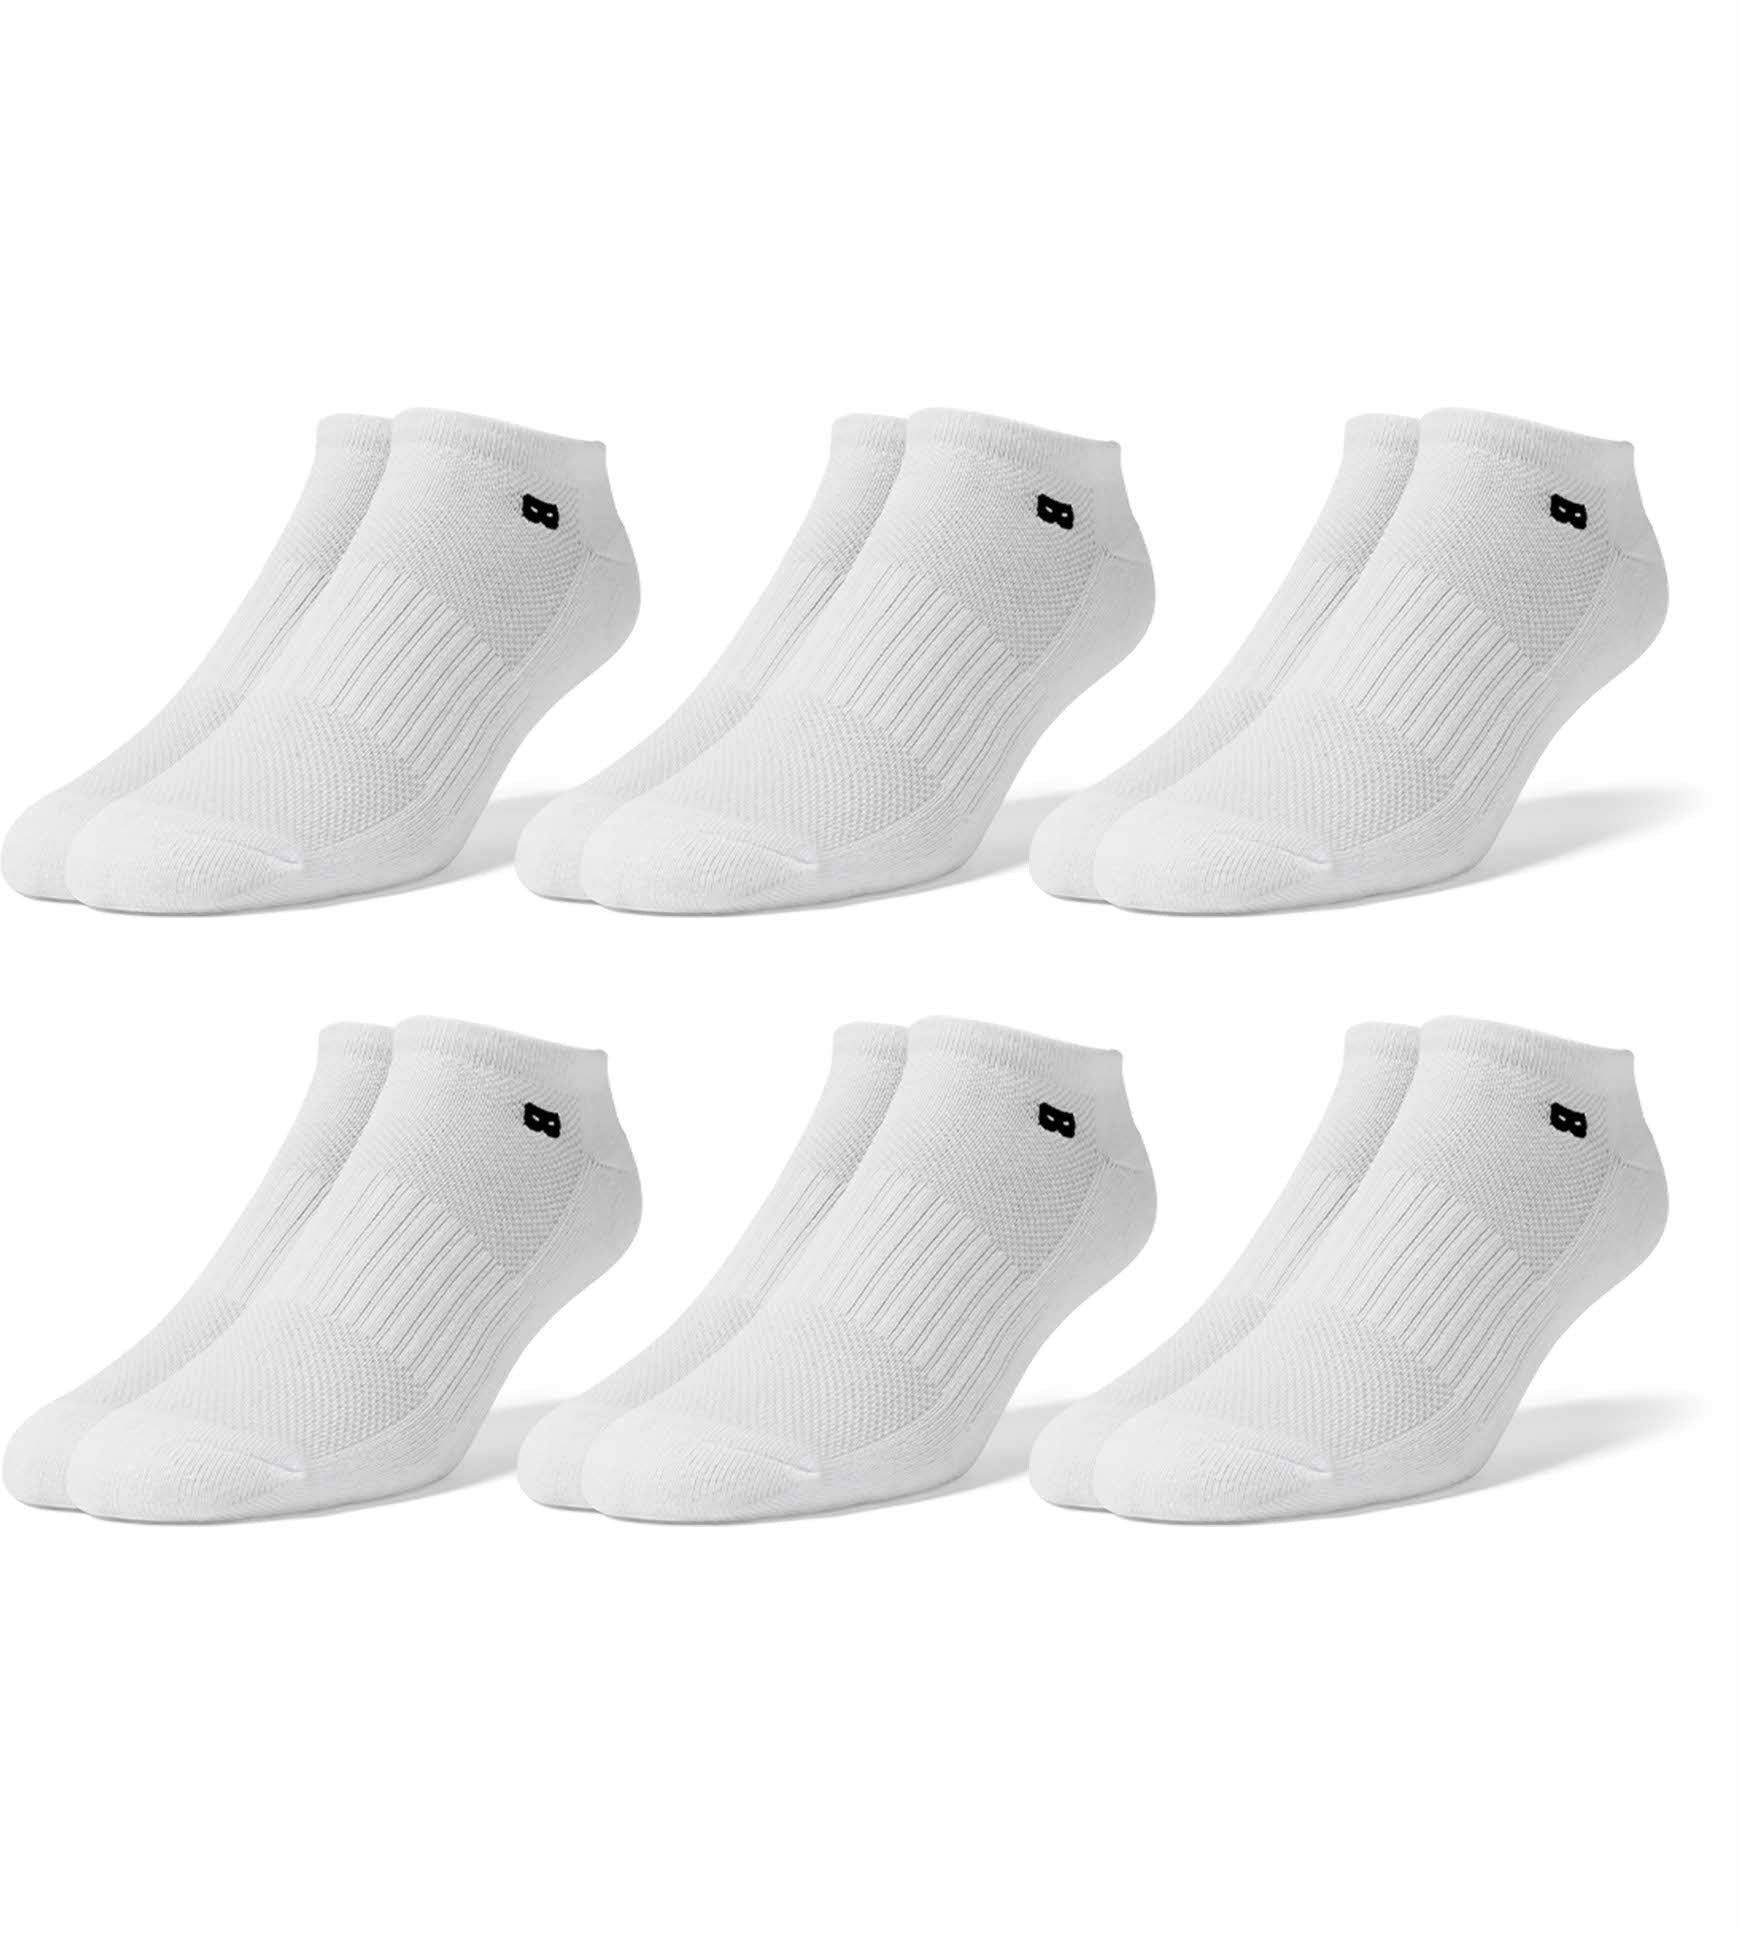 Pair of Thieves Men's Cushion Ankle Socks - Blackout & Whiteout - 3 Pack